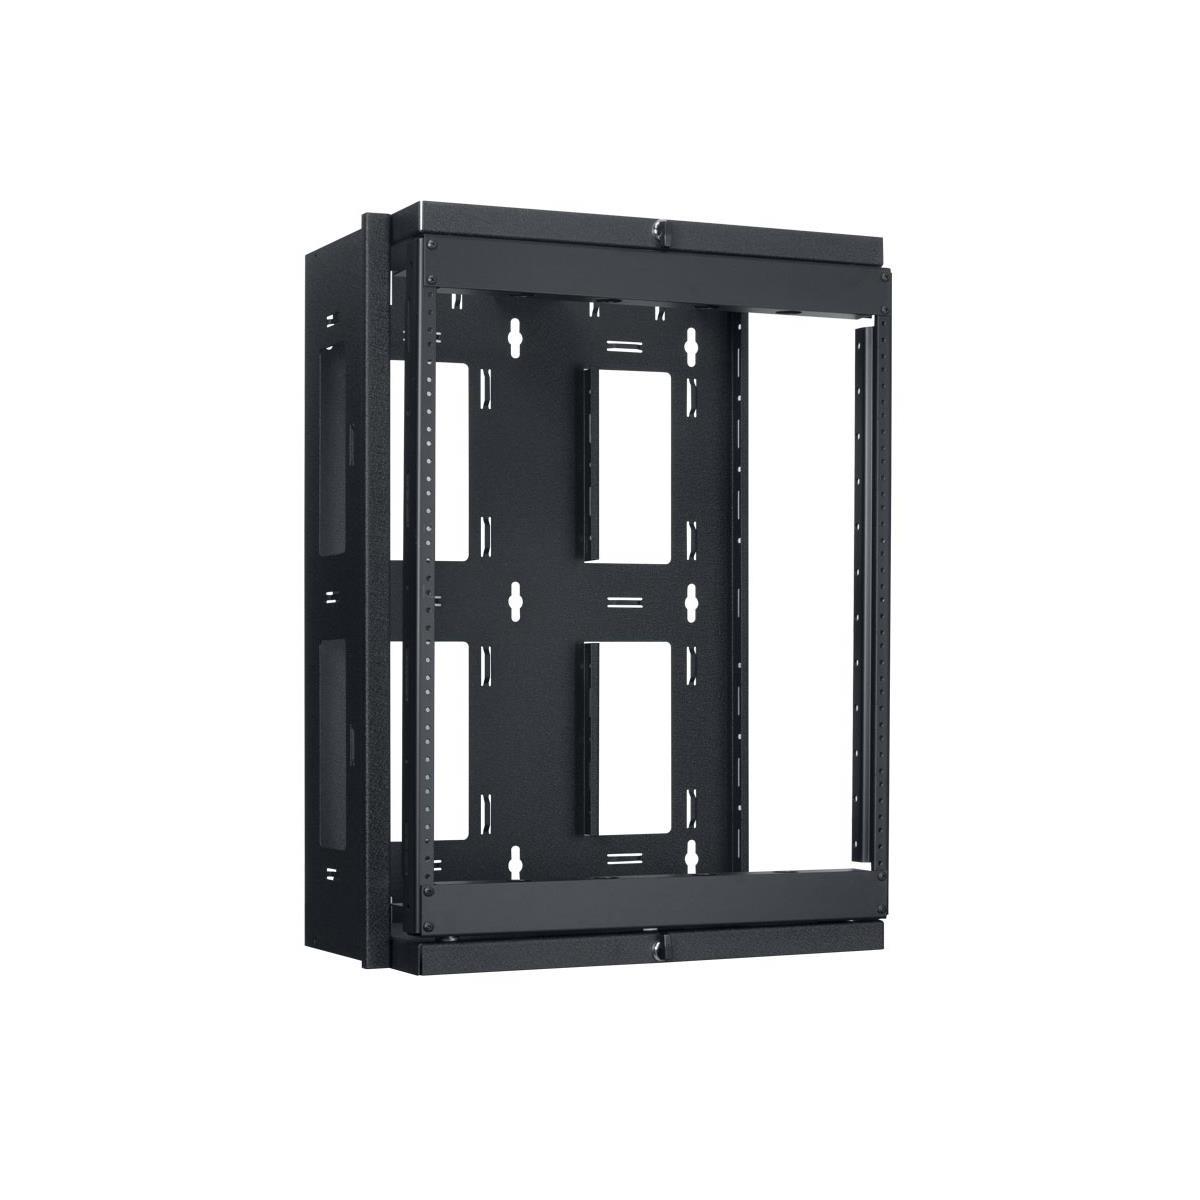 Image of Lowell Manufacturing SGR-1212 12U Swing-Gate Open Frame Rack